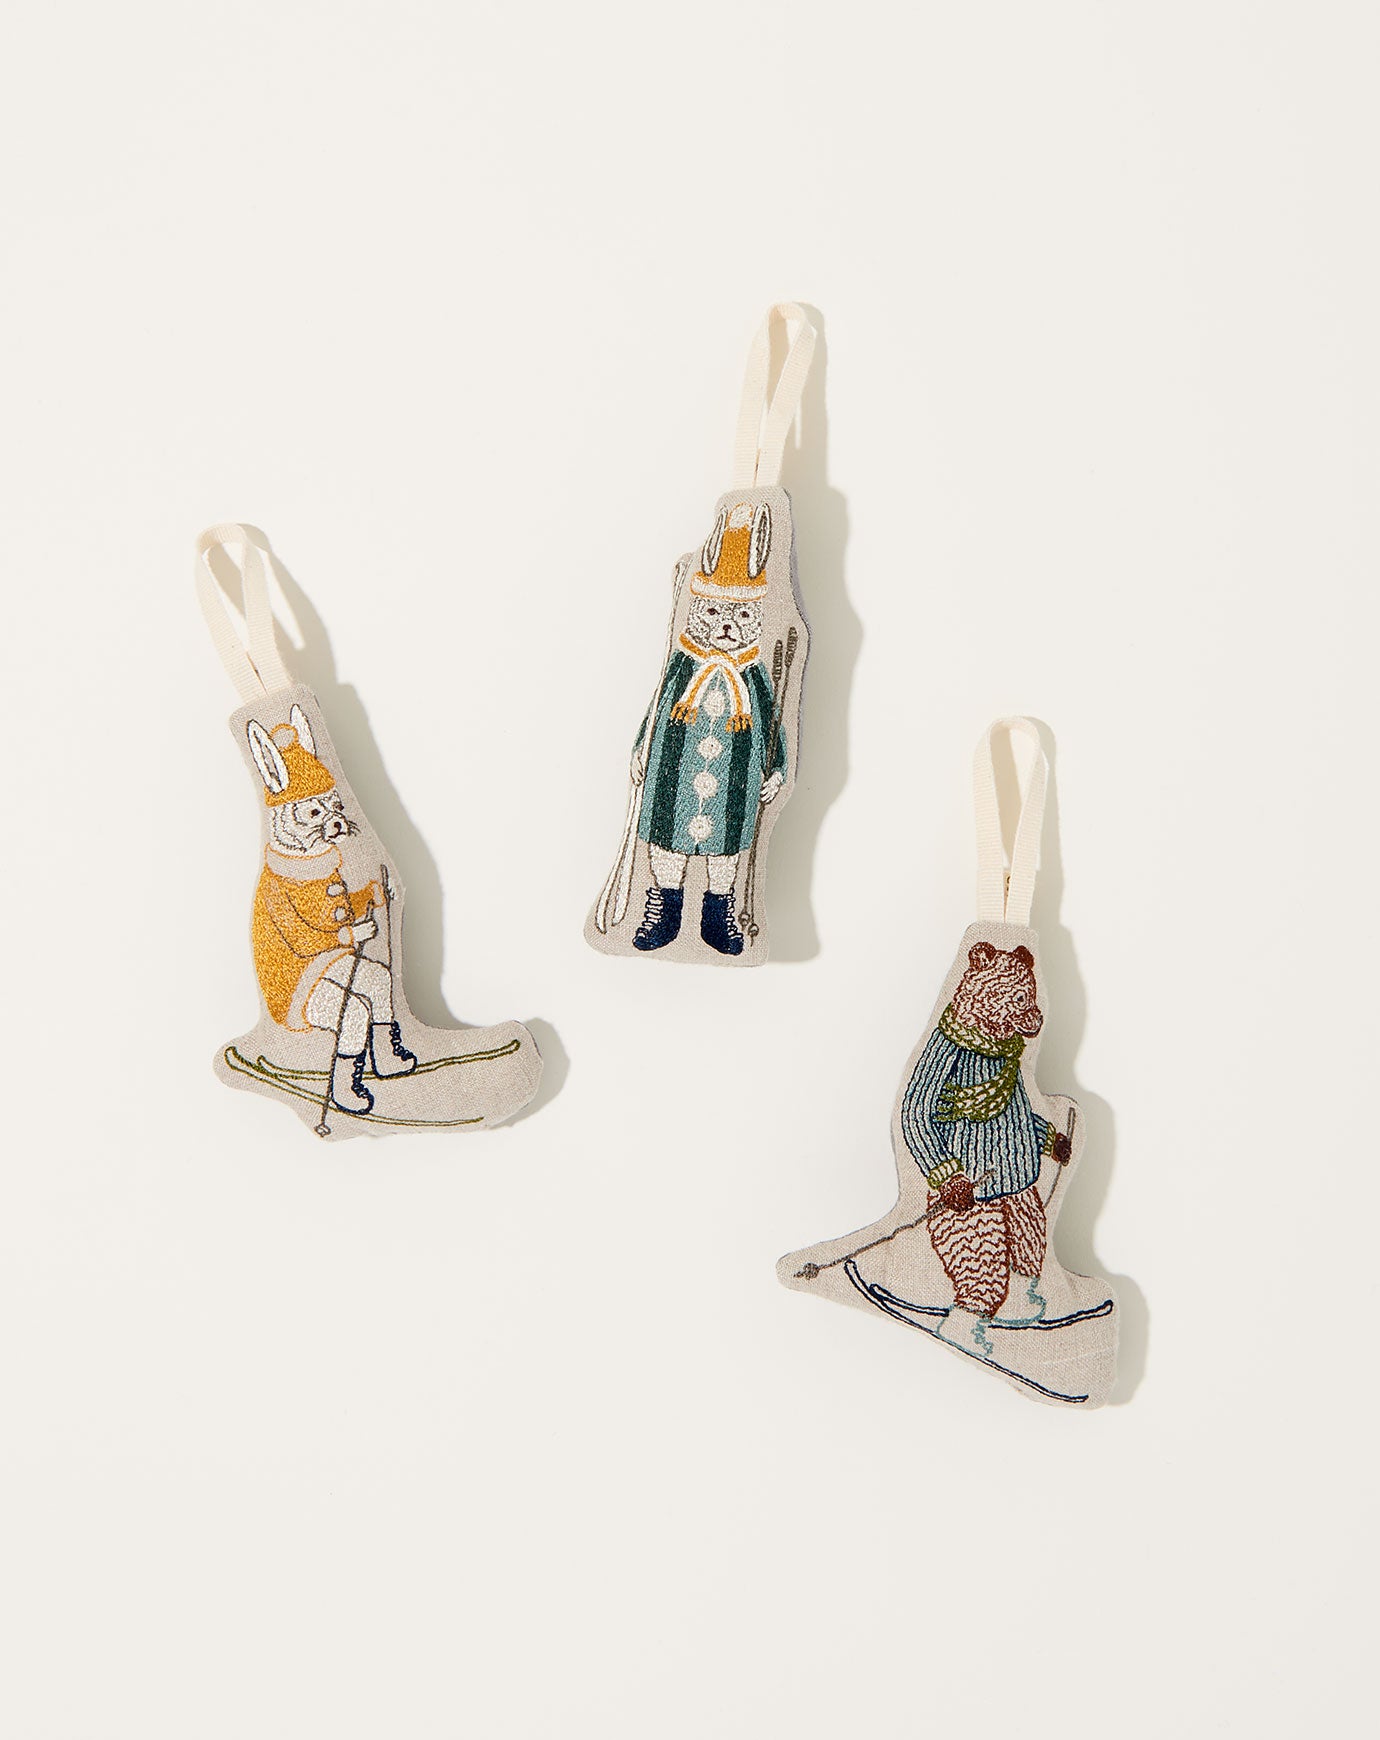 Coral & Tusk Sloped Bunny Ornament